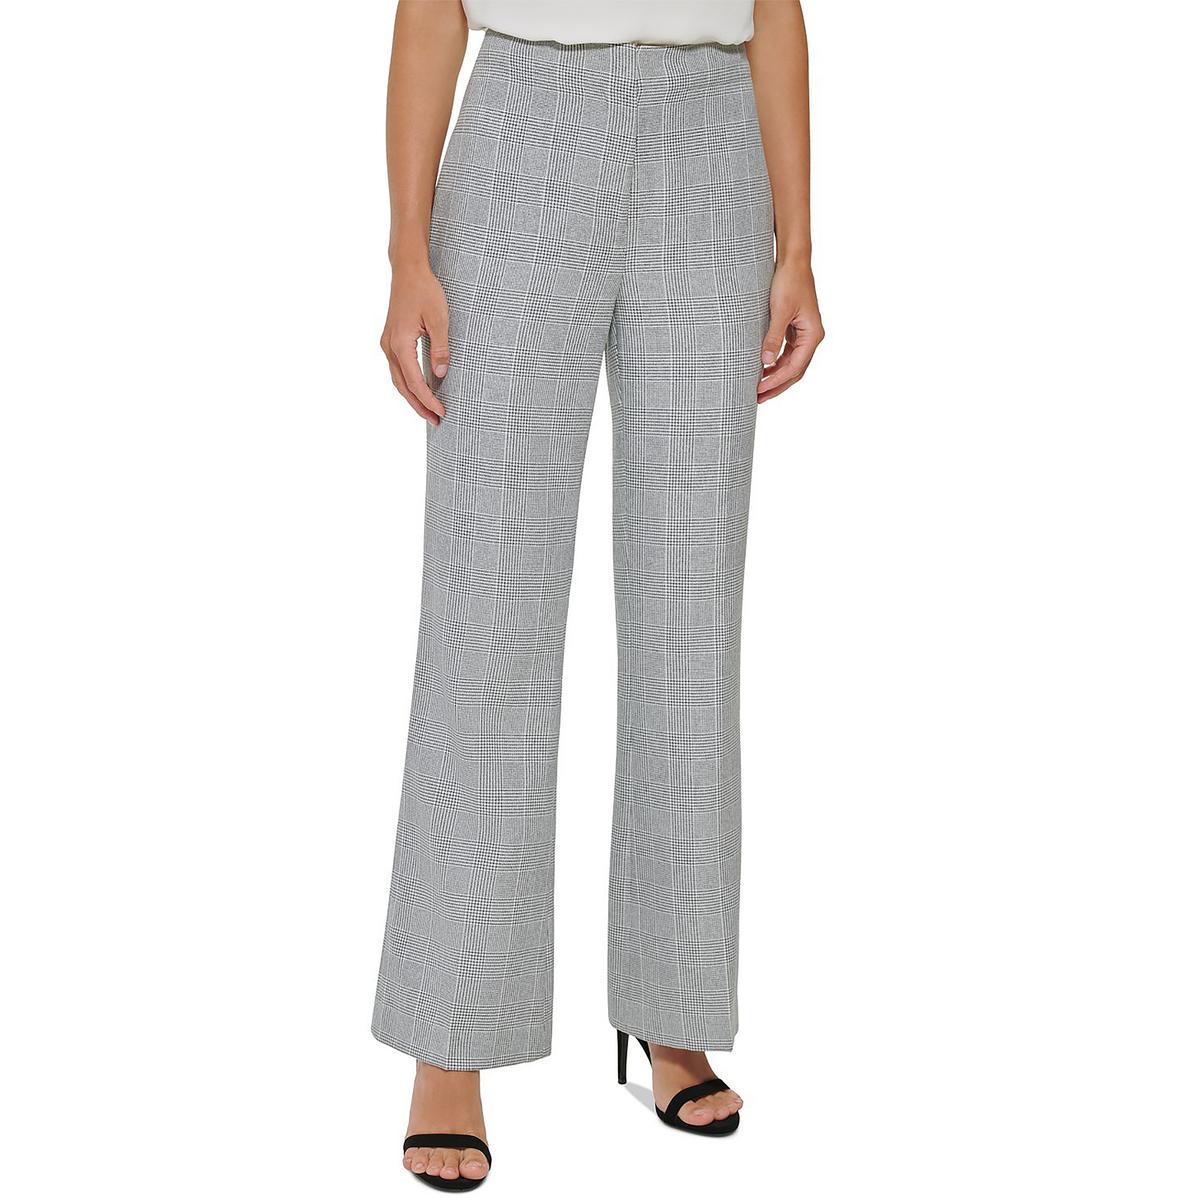 DKNY Womens High-Rise Formal Business Wide Leg Pants Trousers BHFO 4126